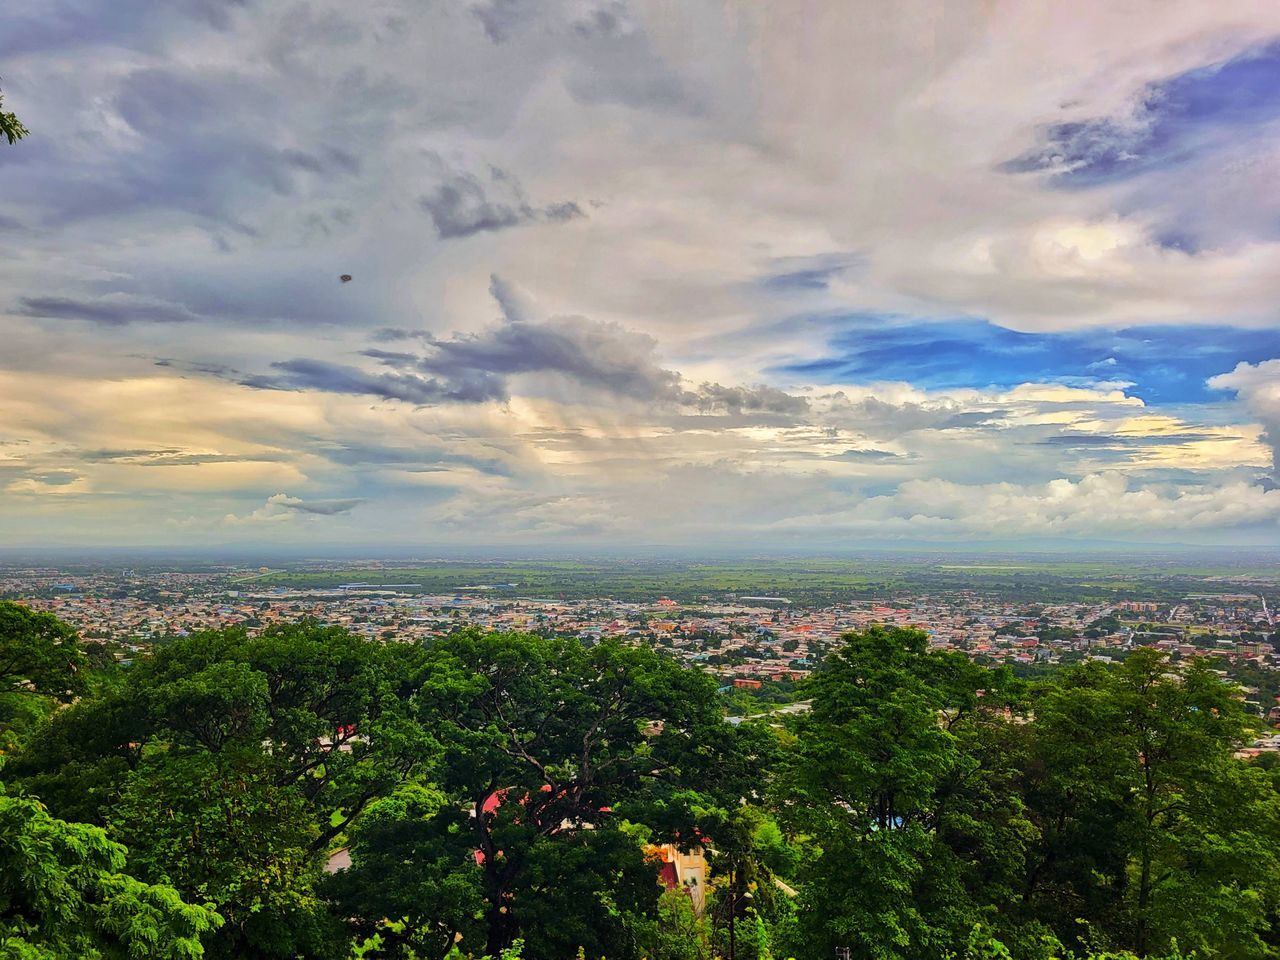 sky, nature, environment, cloud, horizon, landscape, city, architecture, plant, hill, beauty in nature, scenics - nature, tree, rural area, morning, land, building, cityscape, travel, building exterior, outdoors, plain, travel destinations, no people, sunlight, field, built structure, dramatic sky, urban skyline, tourism, natural environment, high angle view, social issues, residential district, tranquility, grass, summer, cloudscape, blue, aerial view, water, horizon over land, sea, forest, dusk, high up, day, town, flower, green, multi colored, sun, freshness